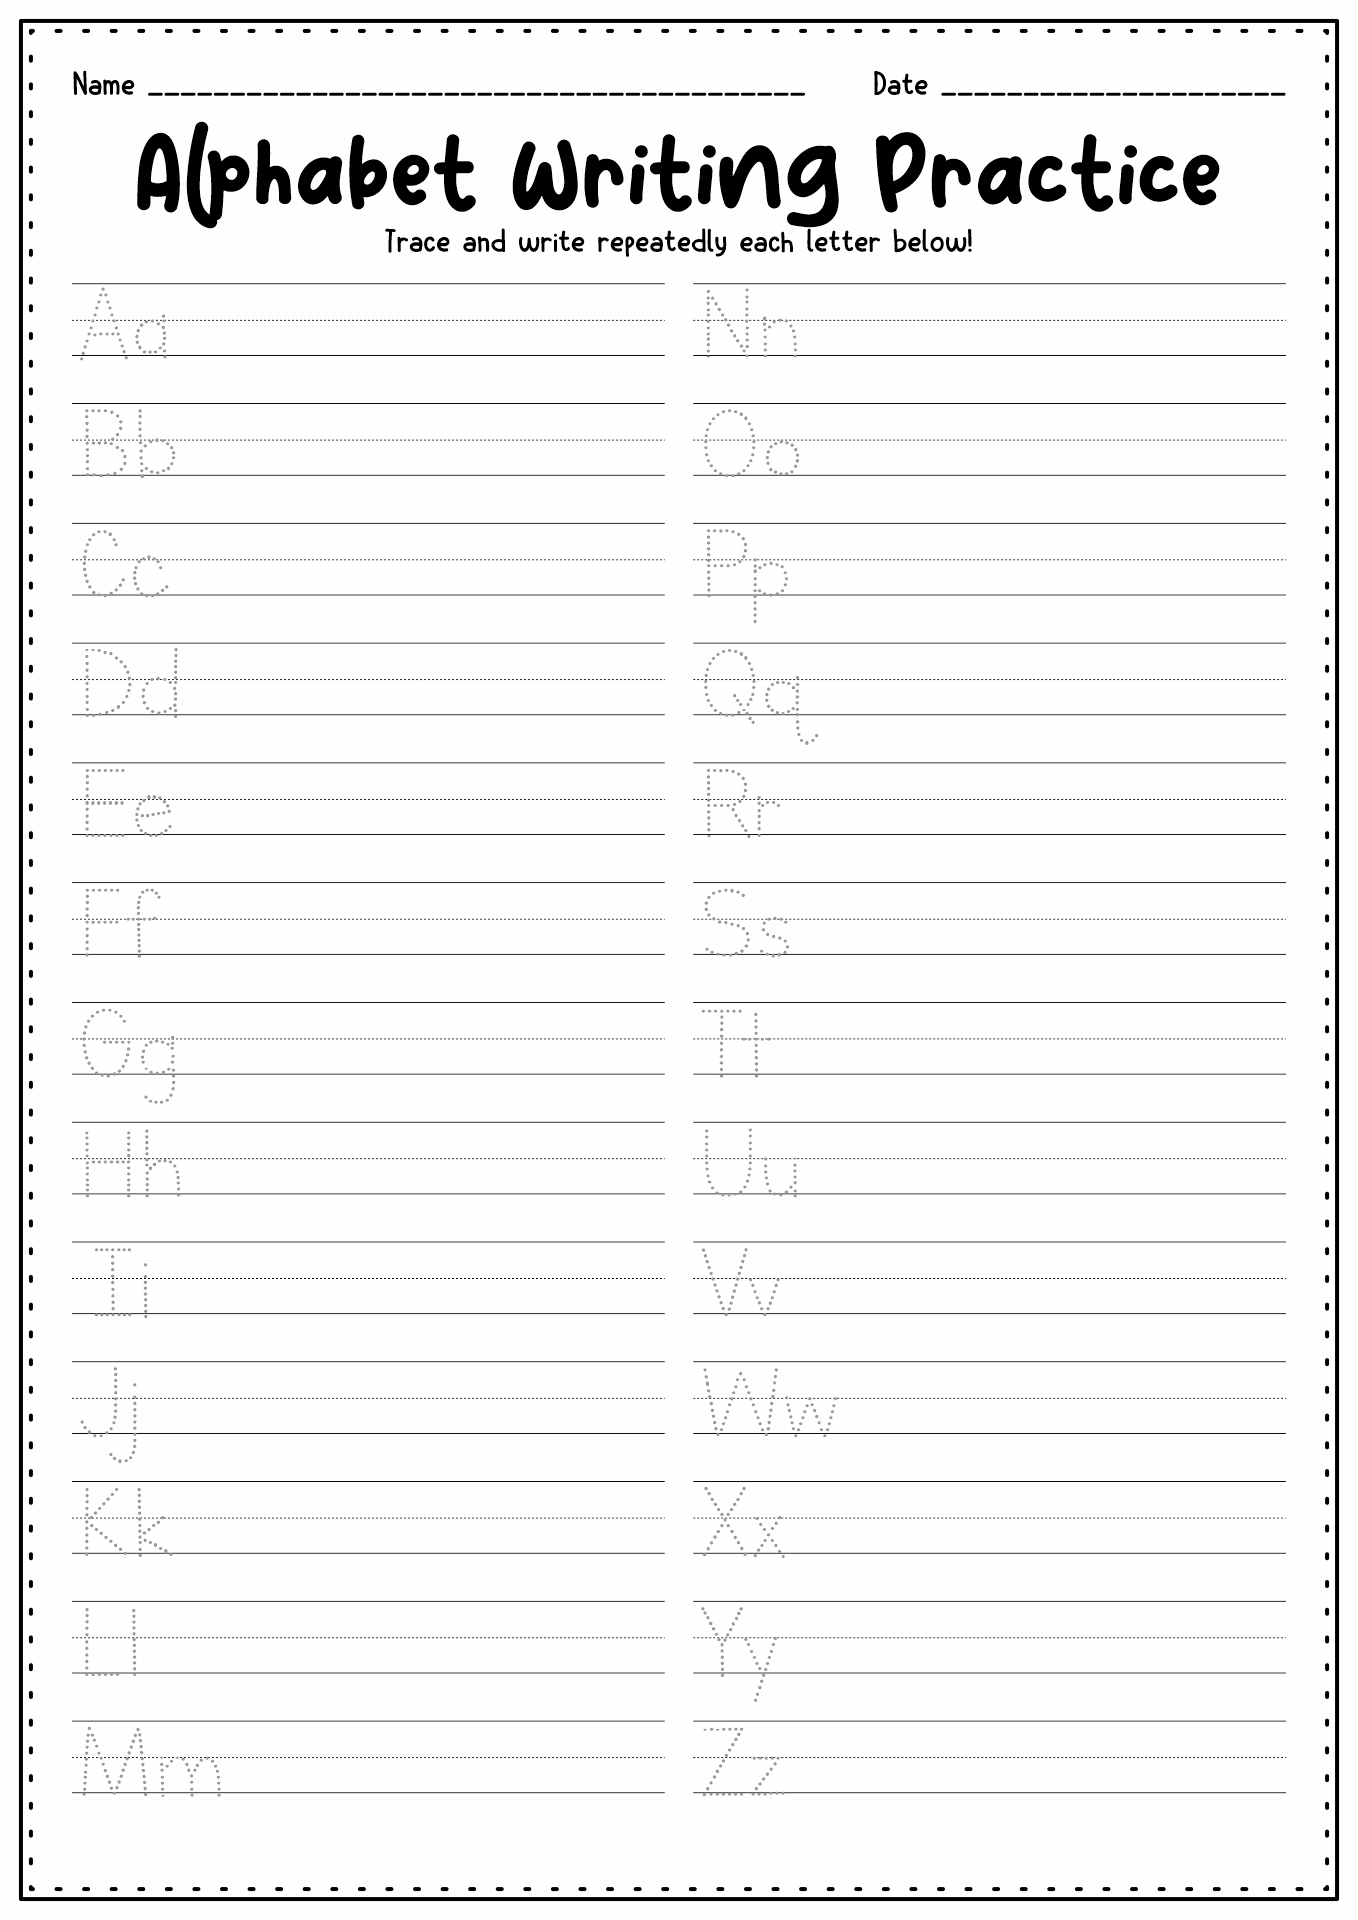 Awesome Practice Writing Letters Worksheet Images - Worksheet for Kids